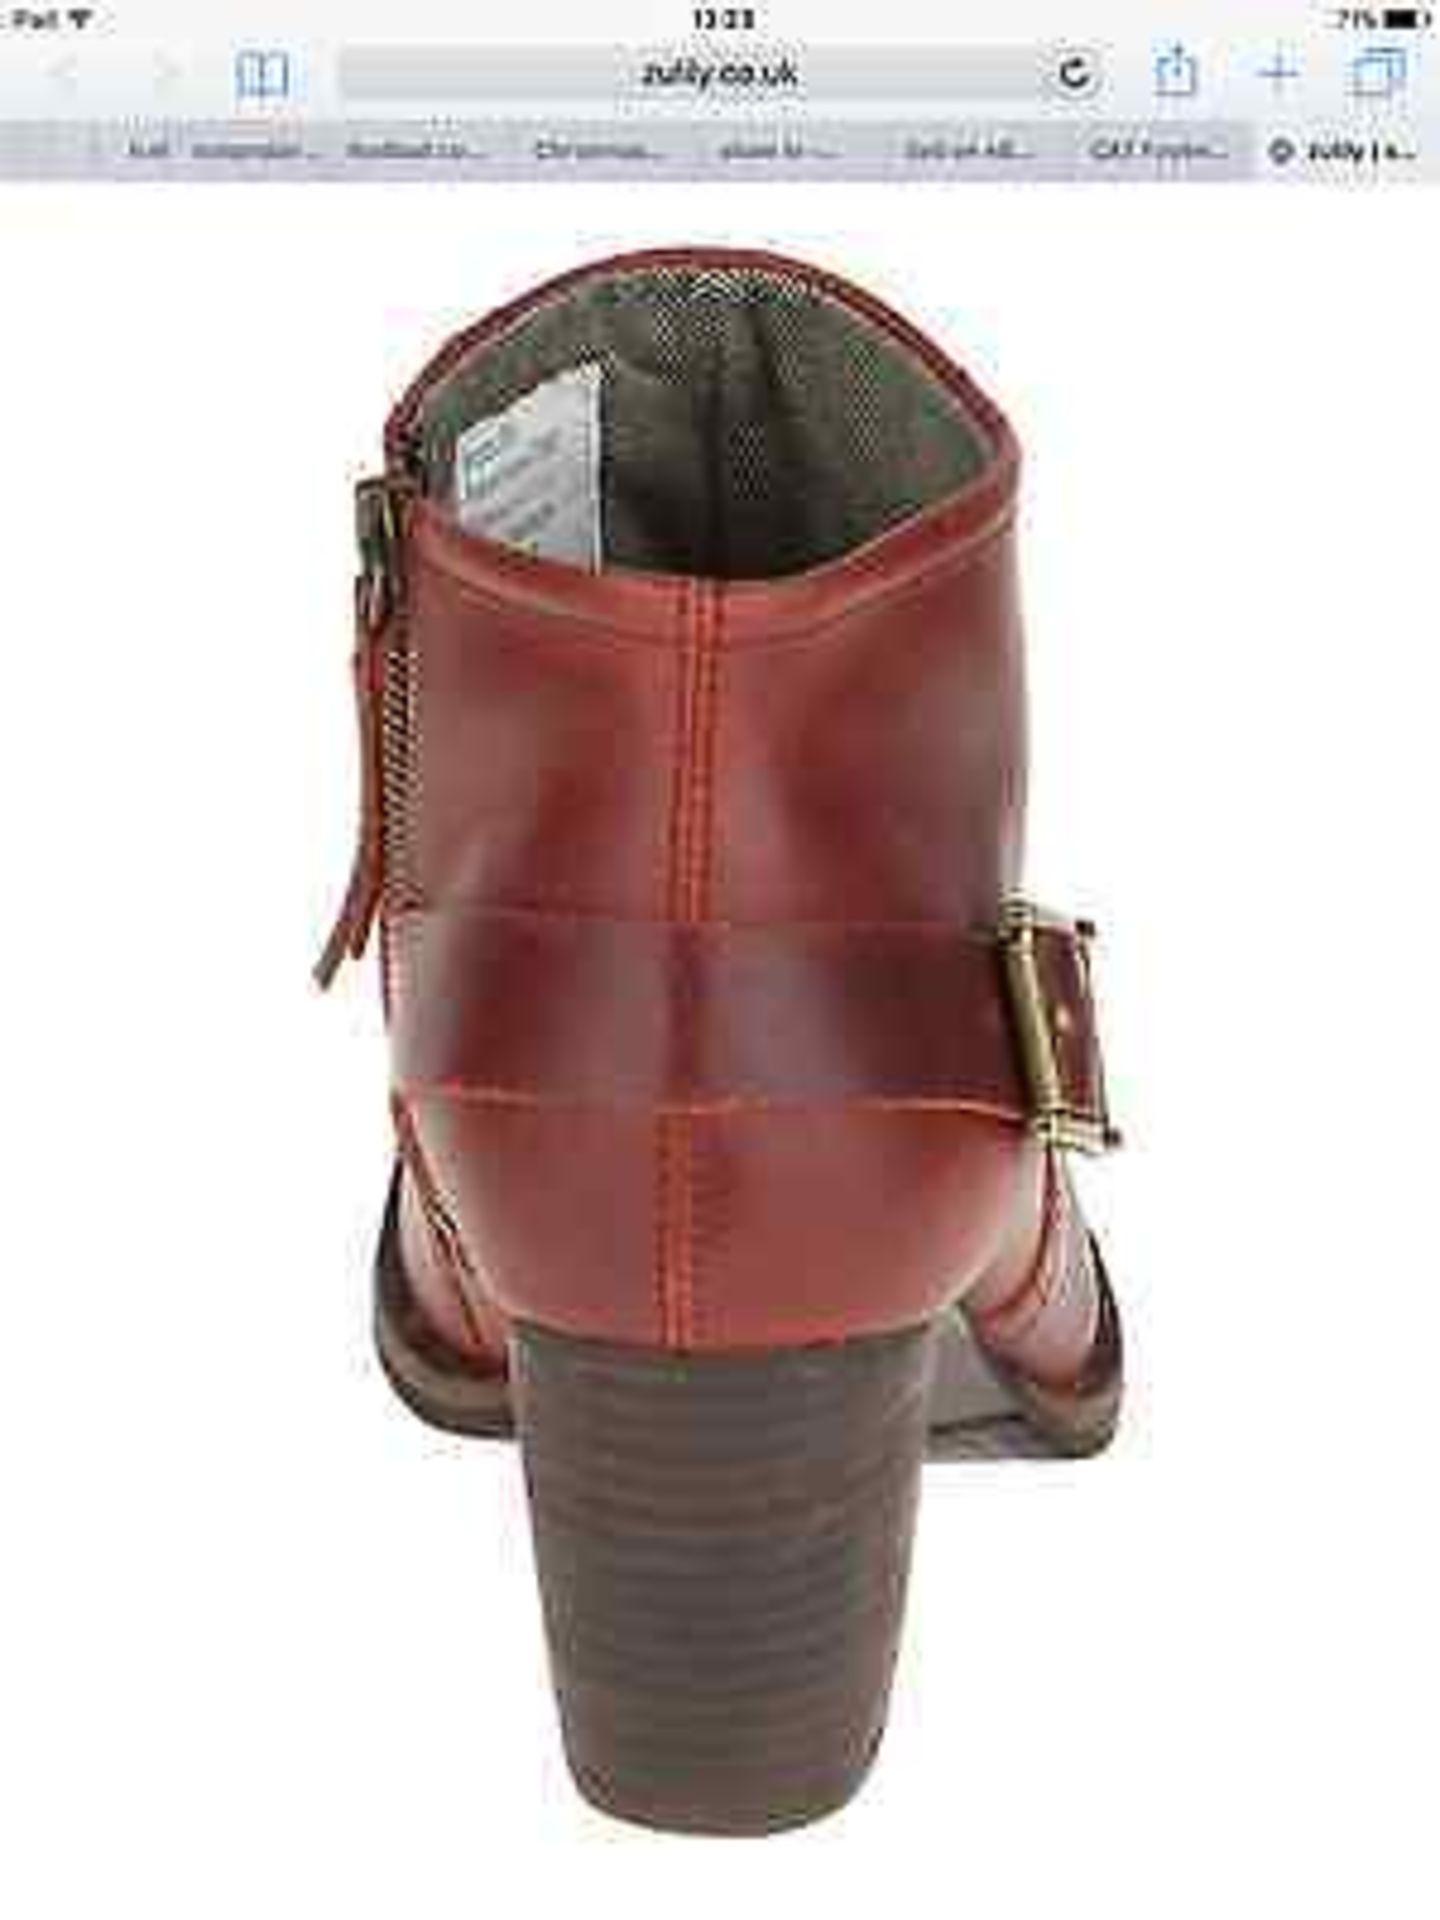 Cat Footwear Firewood Ladies Annette Leather Bootie, size 3.5, RRP £222.99 (New with box) [Ref: ] - Image 2 of 7